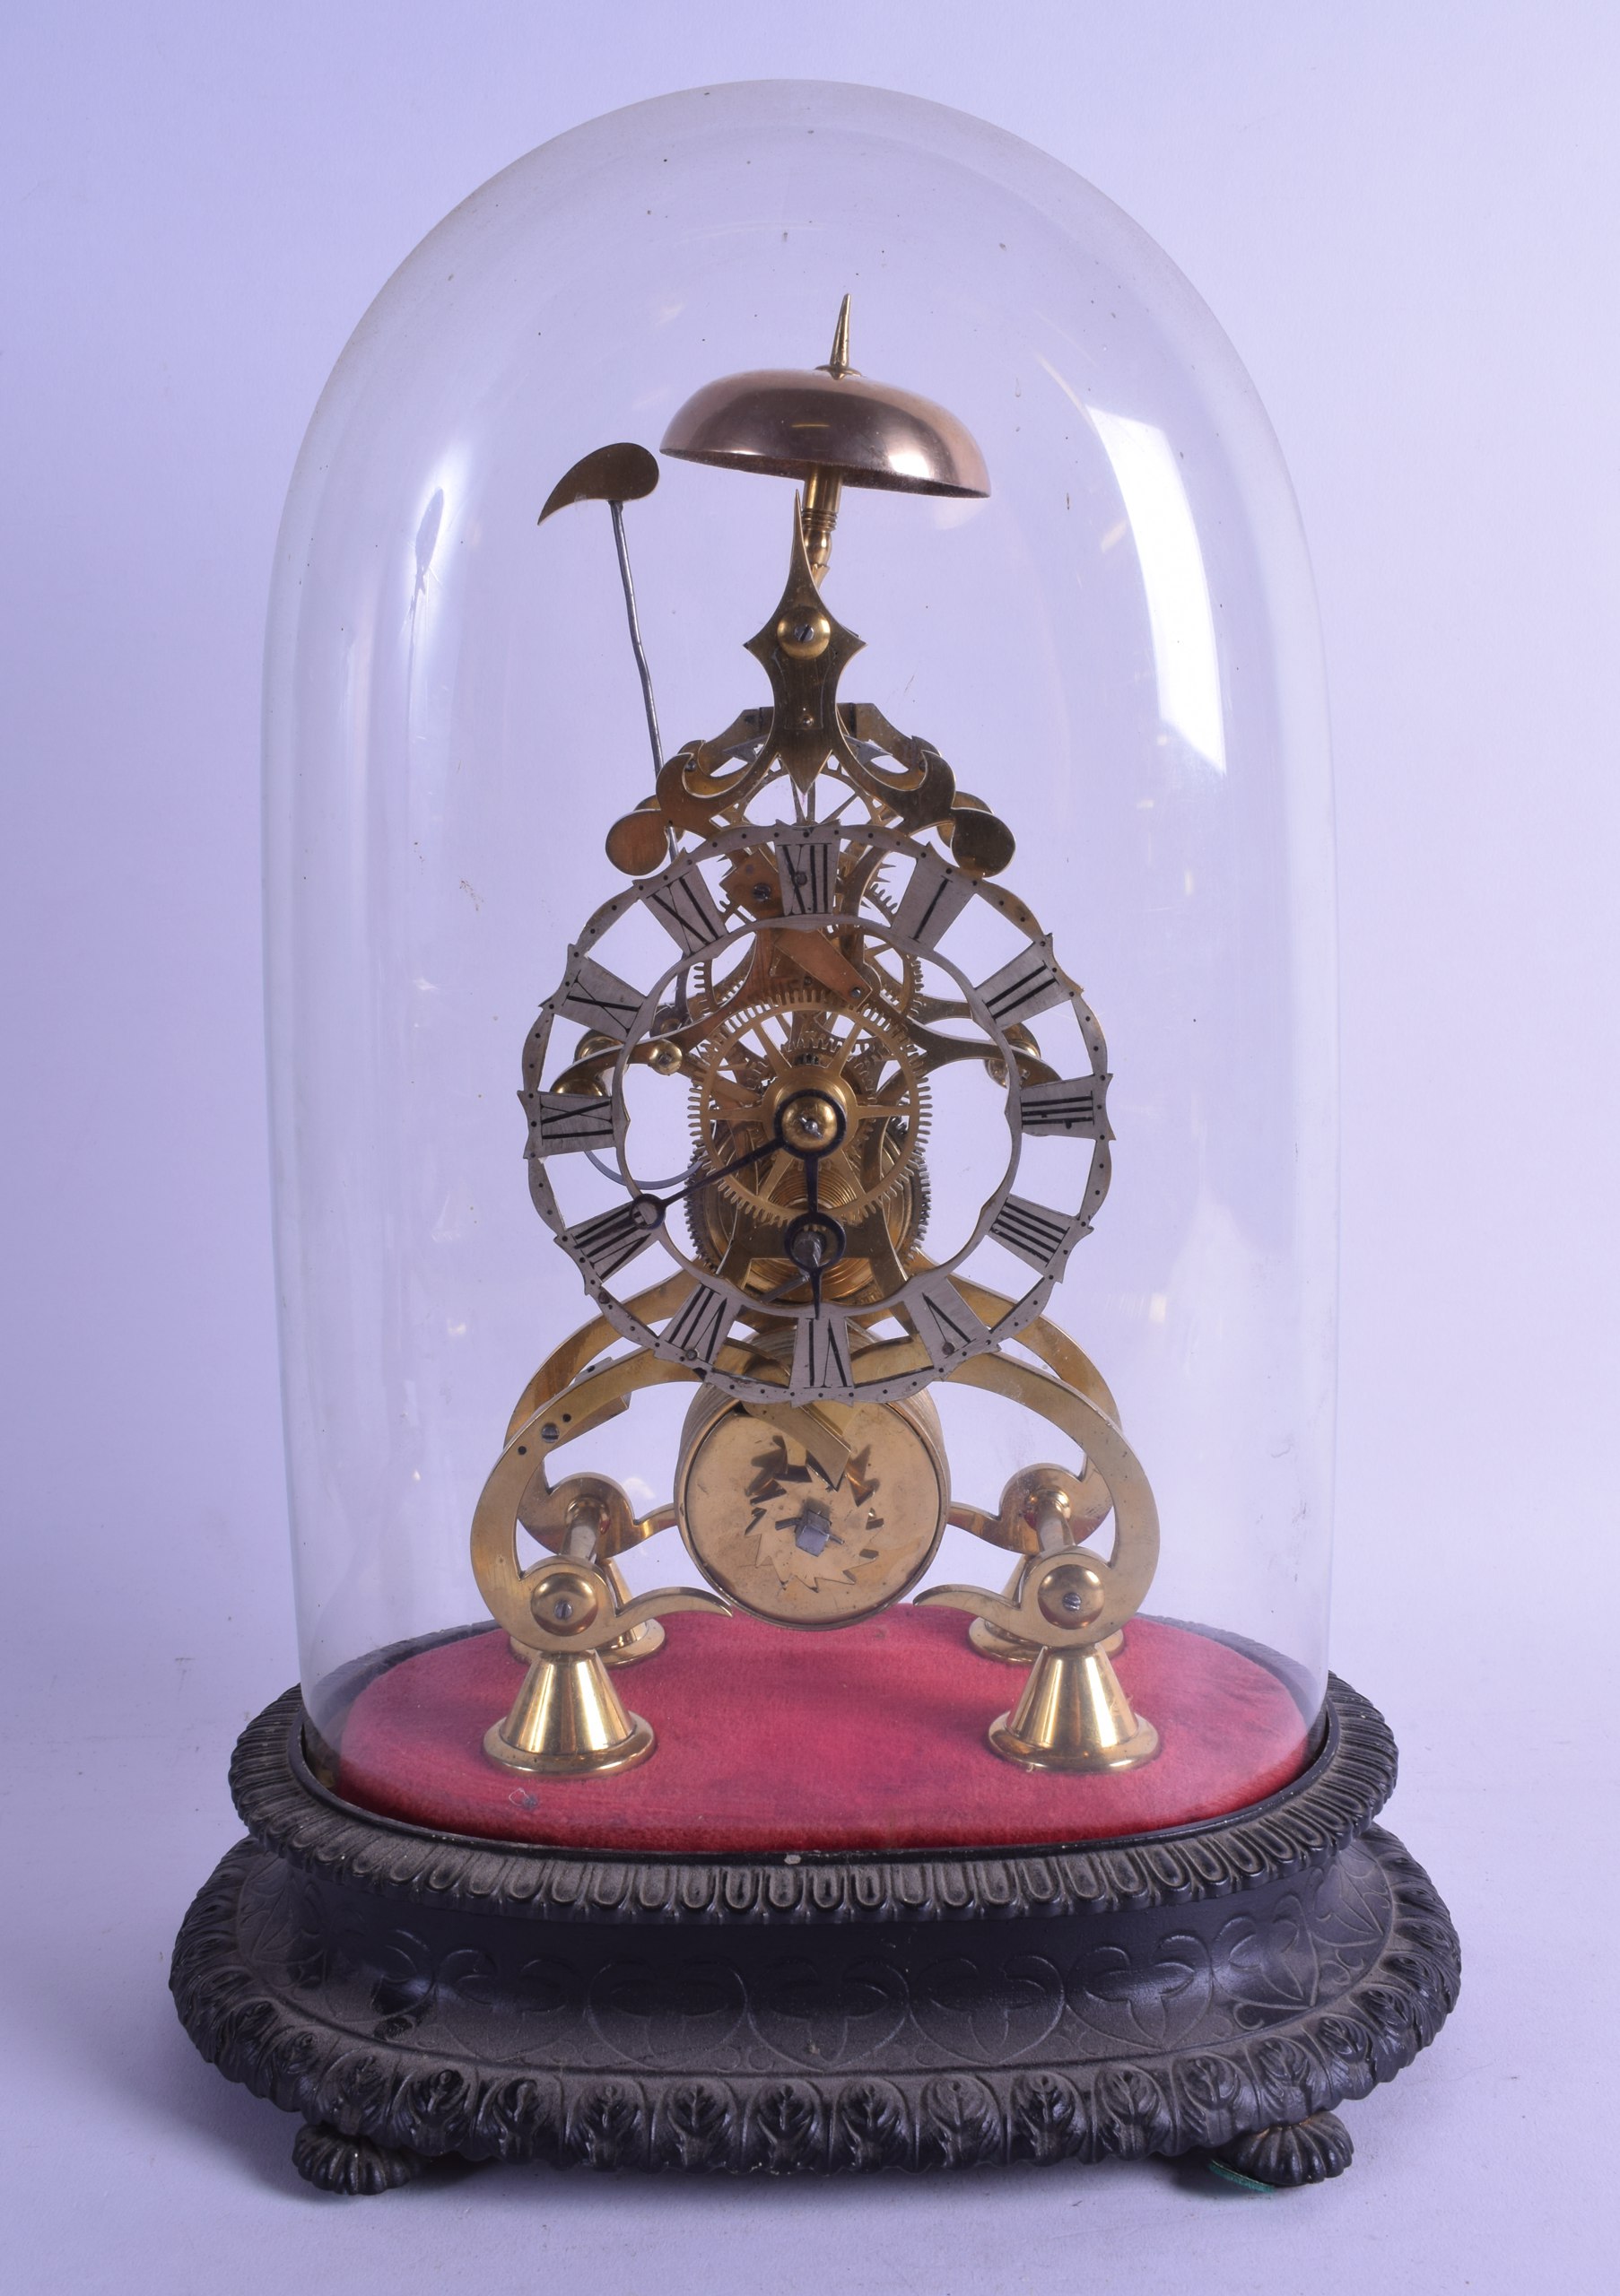 AN EARLY 20TH CENTURY BRASS SKELETON CLOCK with glass dome and fitted cast iron base. 35 cm high.